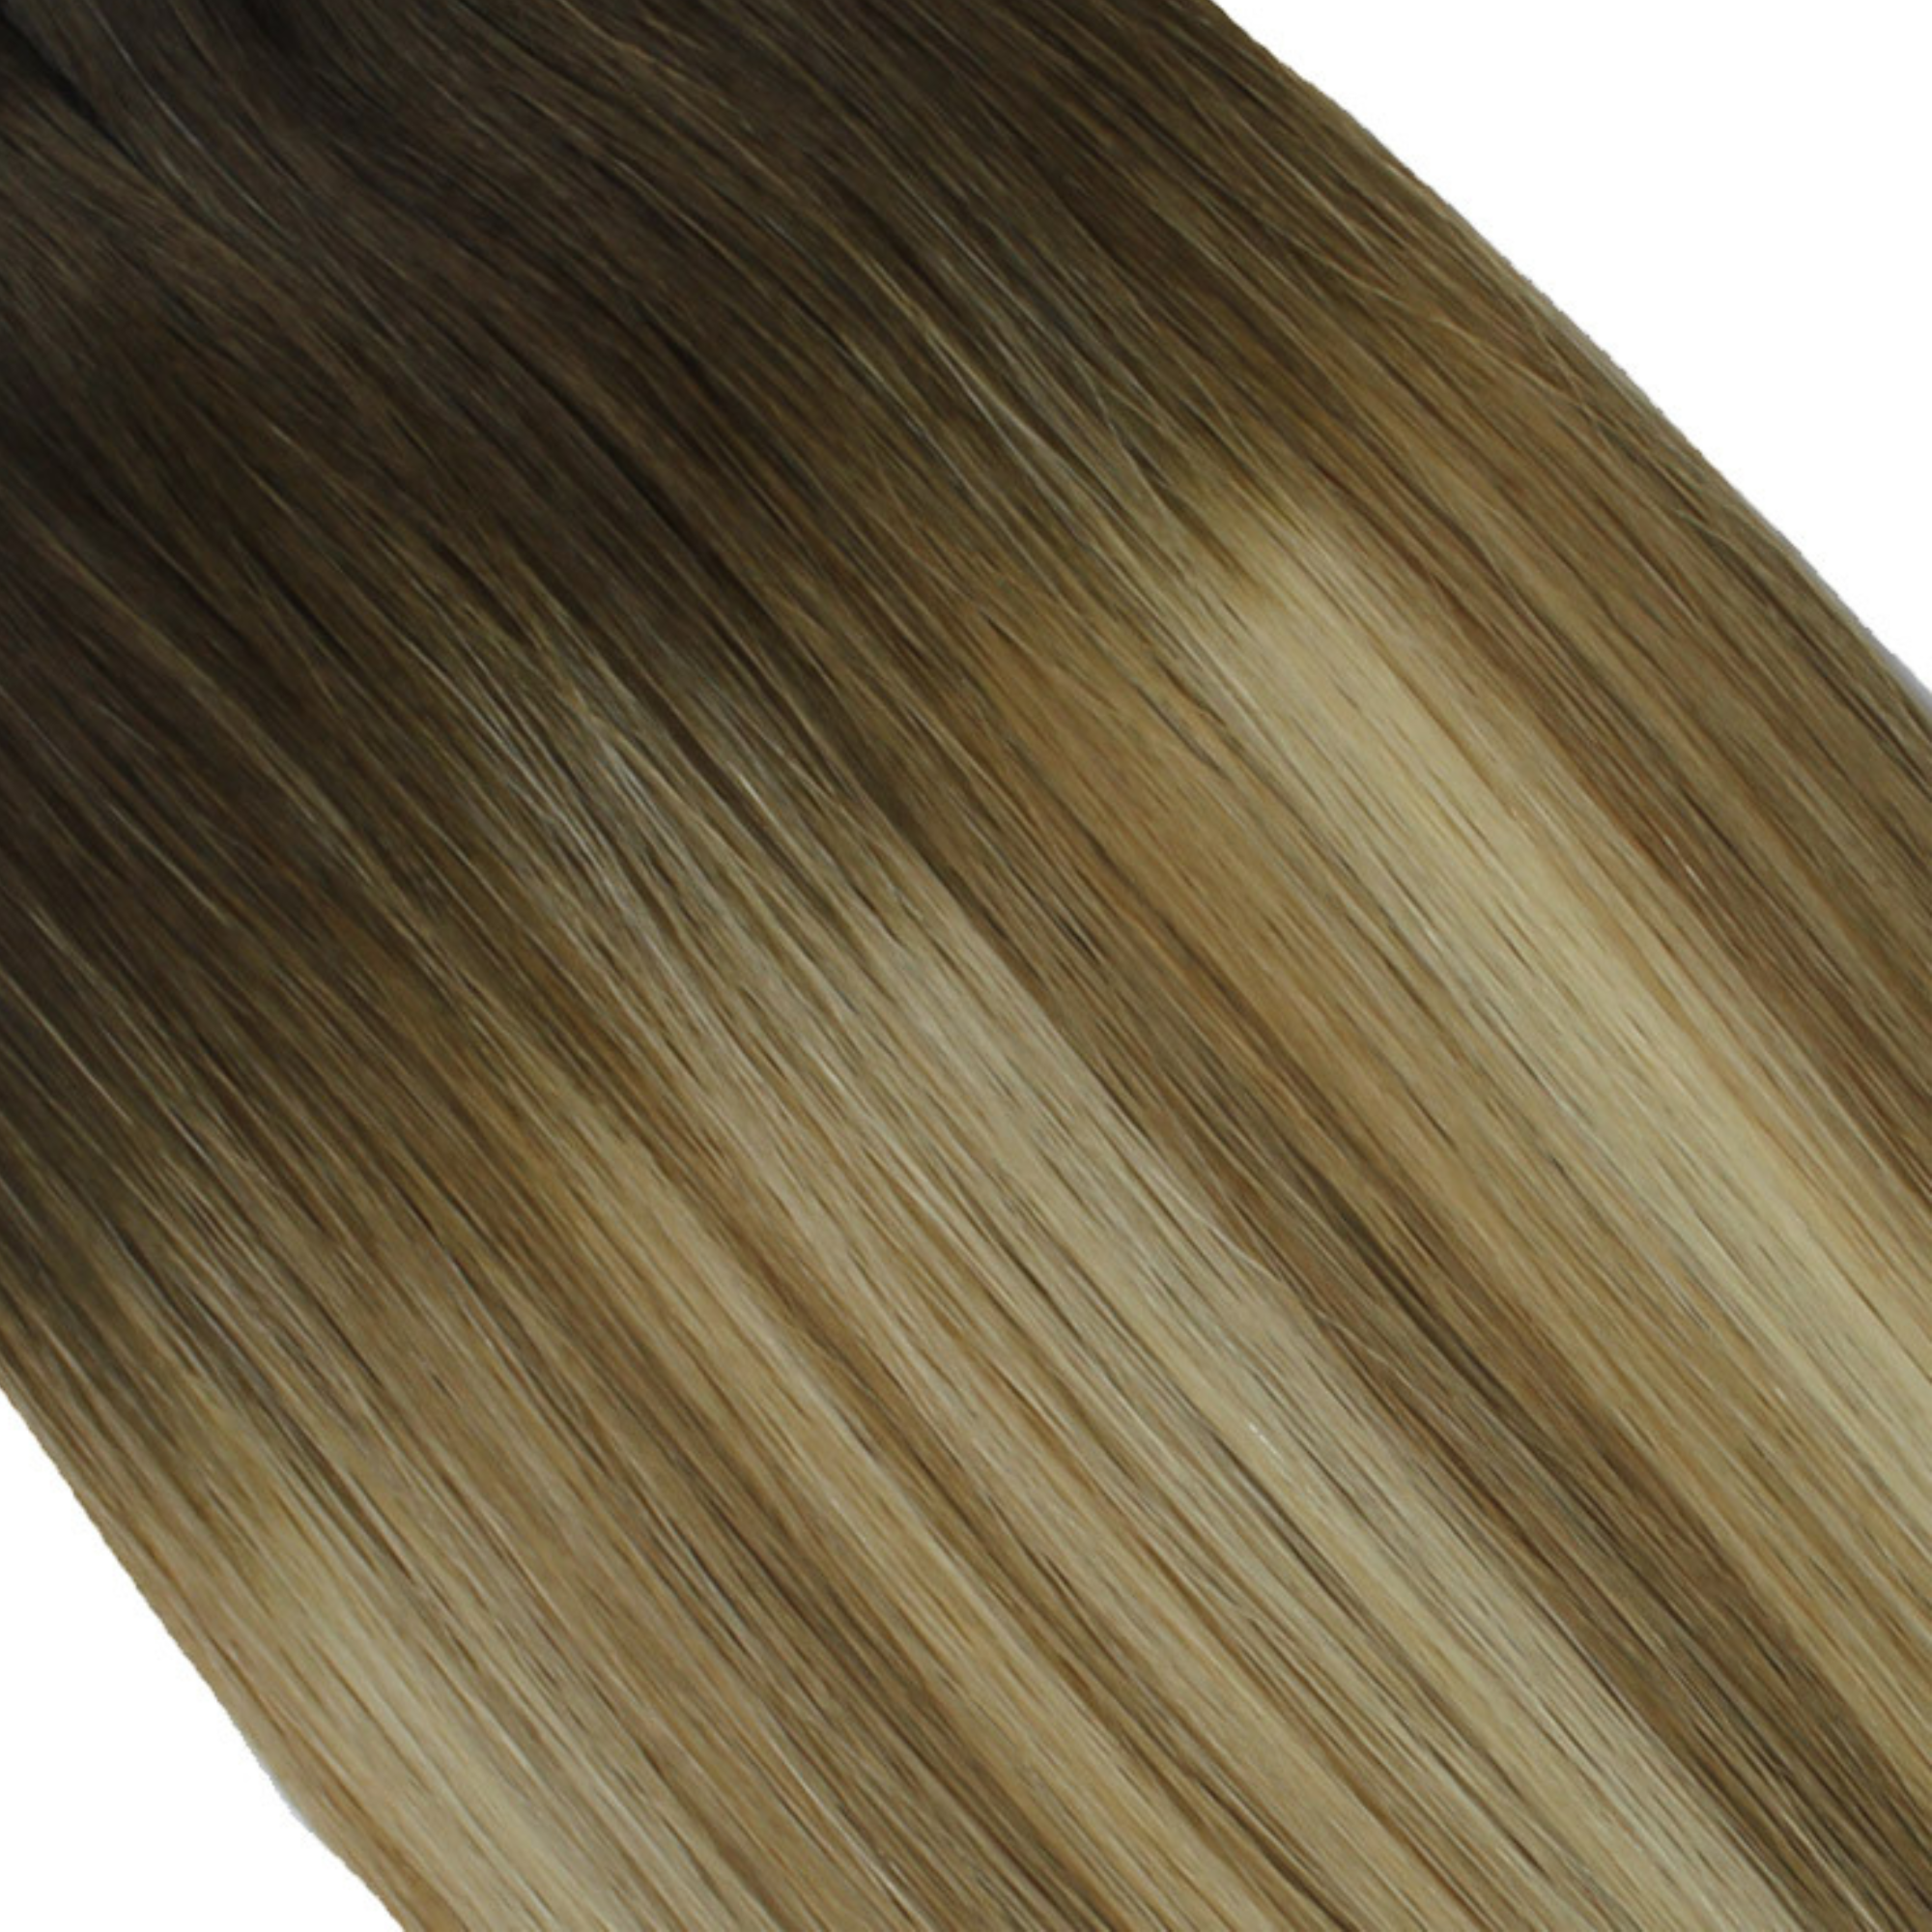 "hair rehab london 22" weft hair extensions shade swatch titled rooted supermodel"